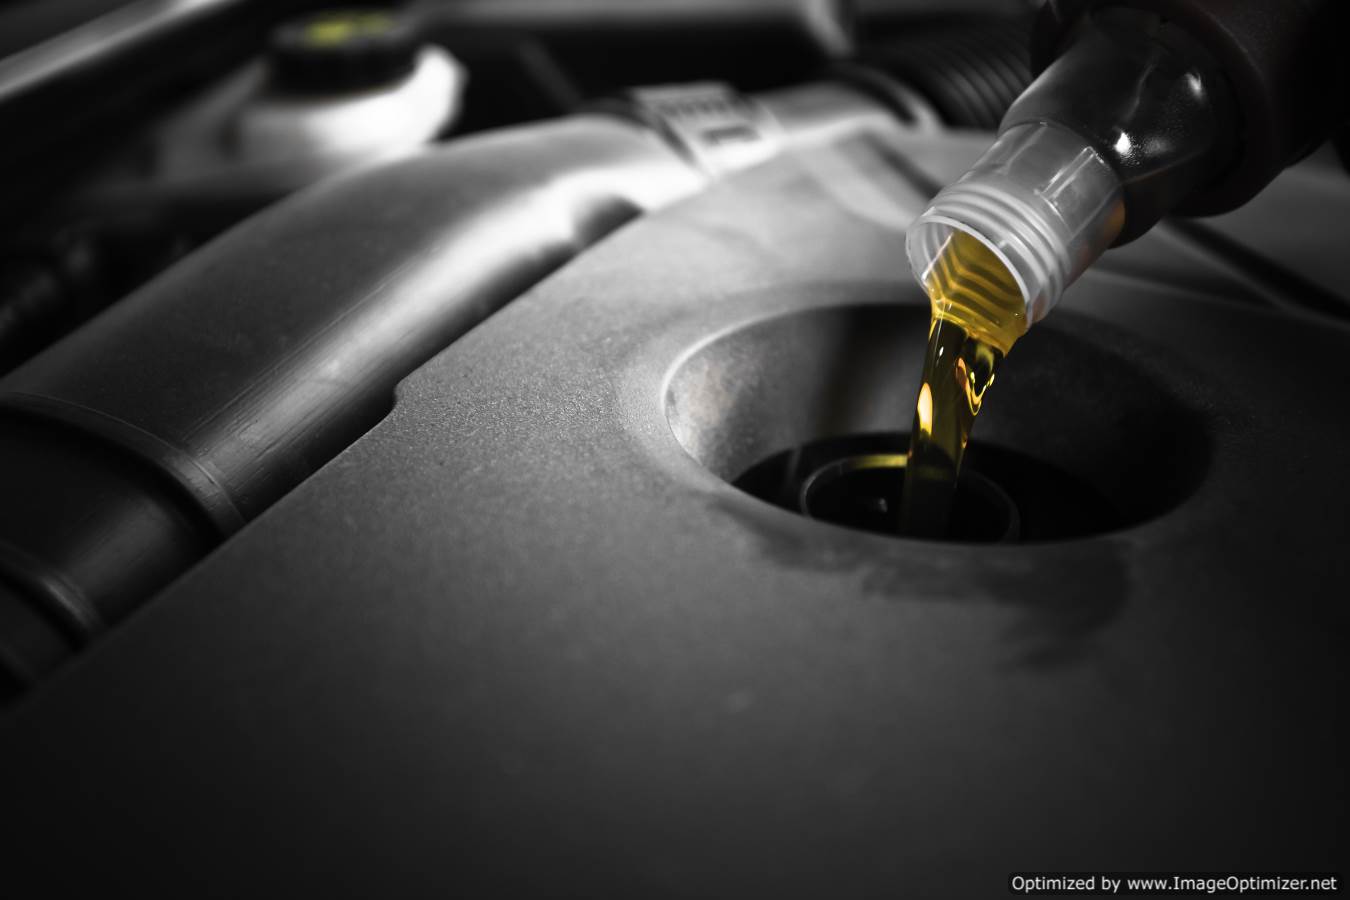 Does Your Car Need An Oil Change Every 3000 Miles